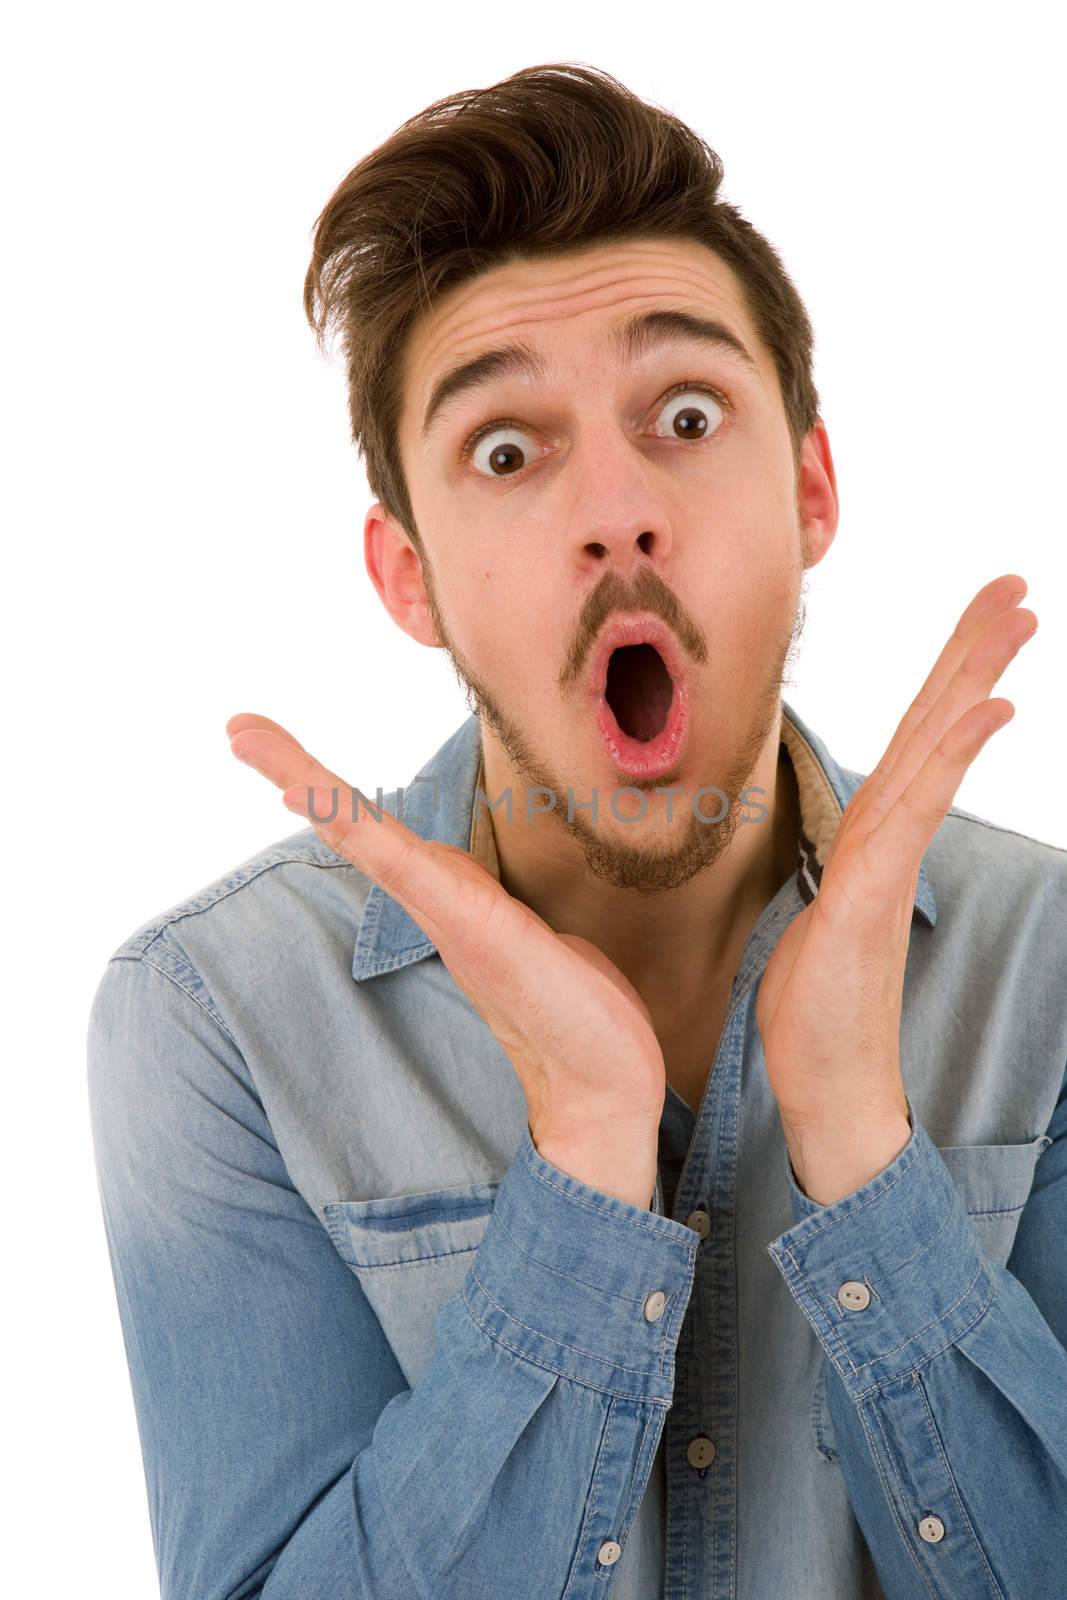 young casual surprised man portrait in a white background